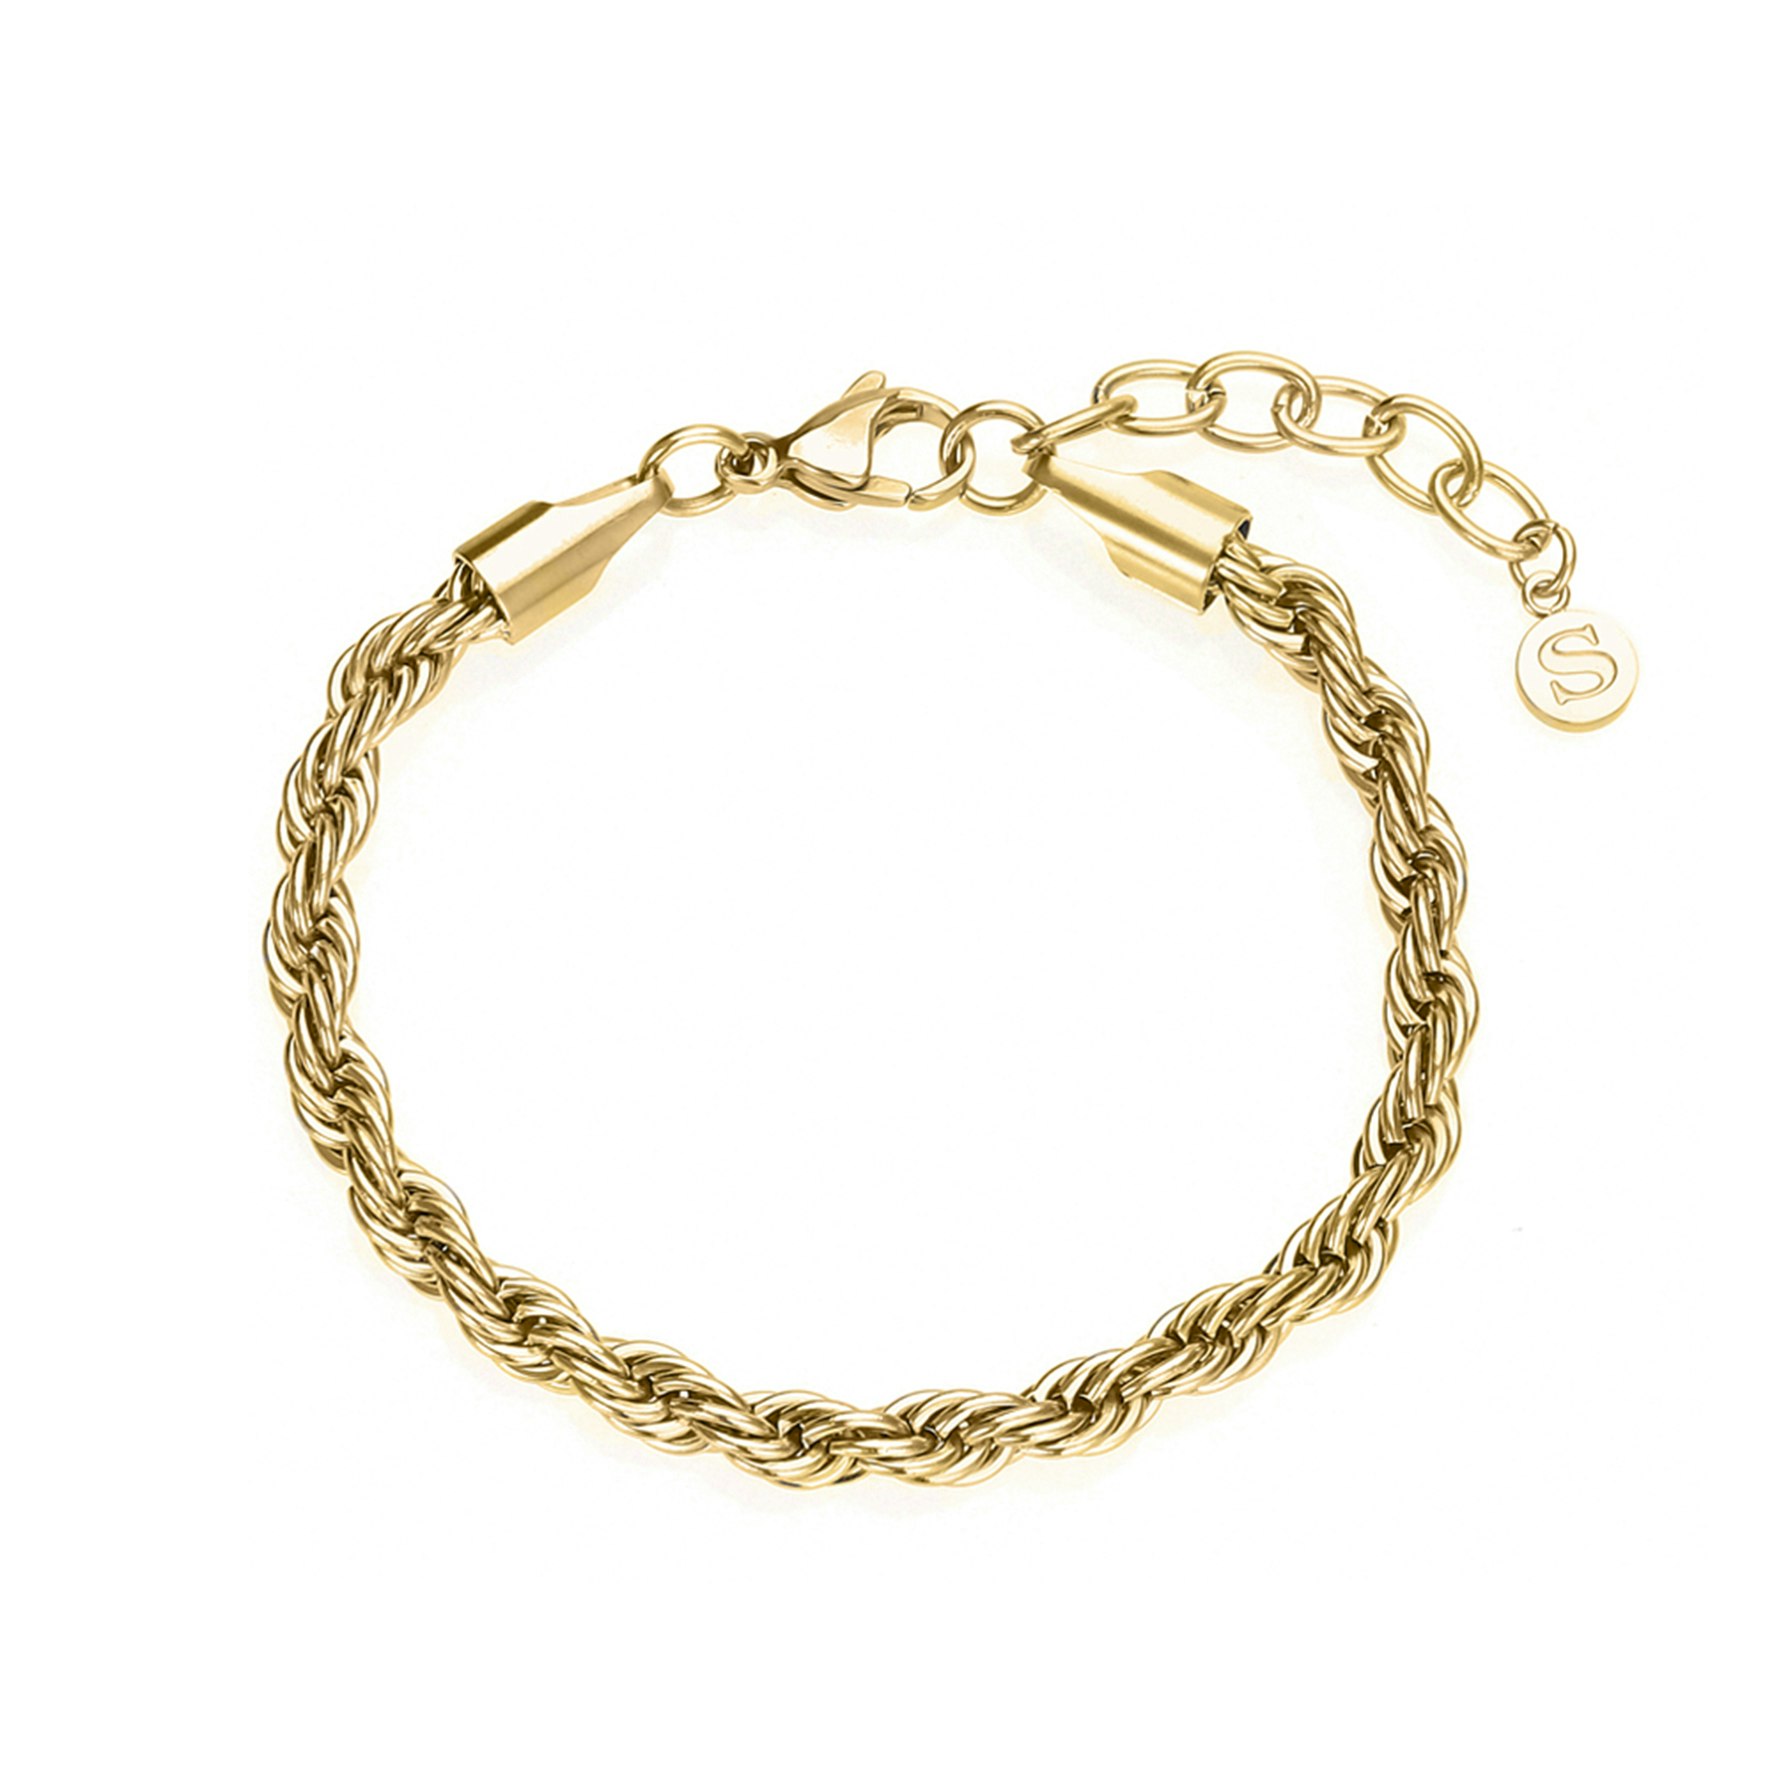 Rope Bracelet from Sistie 2nd in Goldplated stainless steel